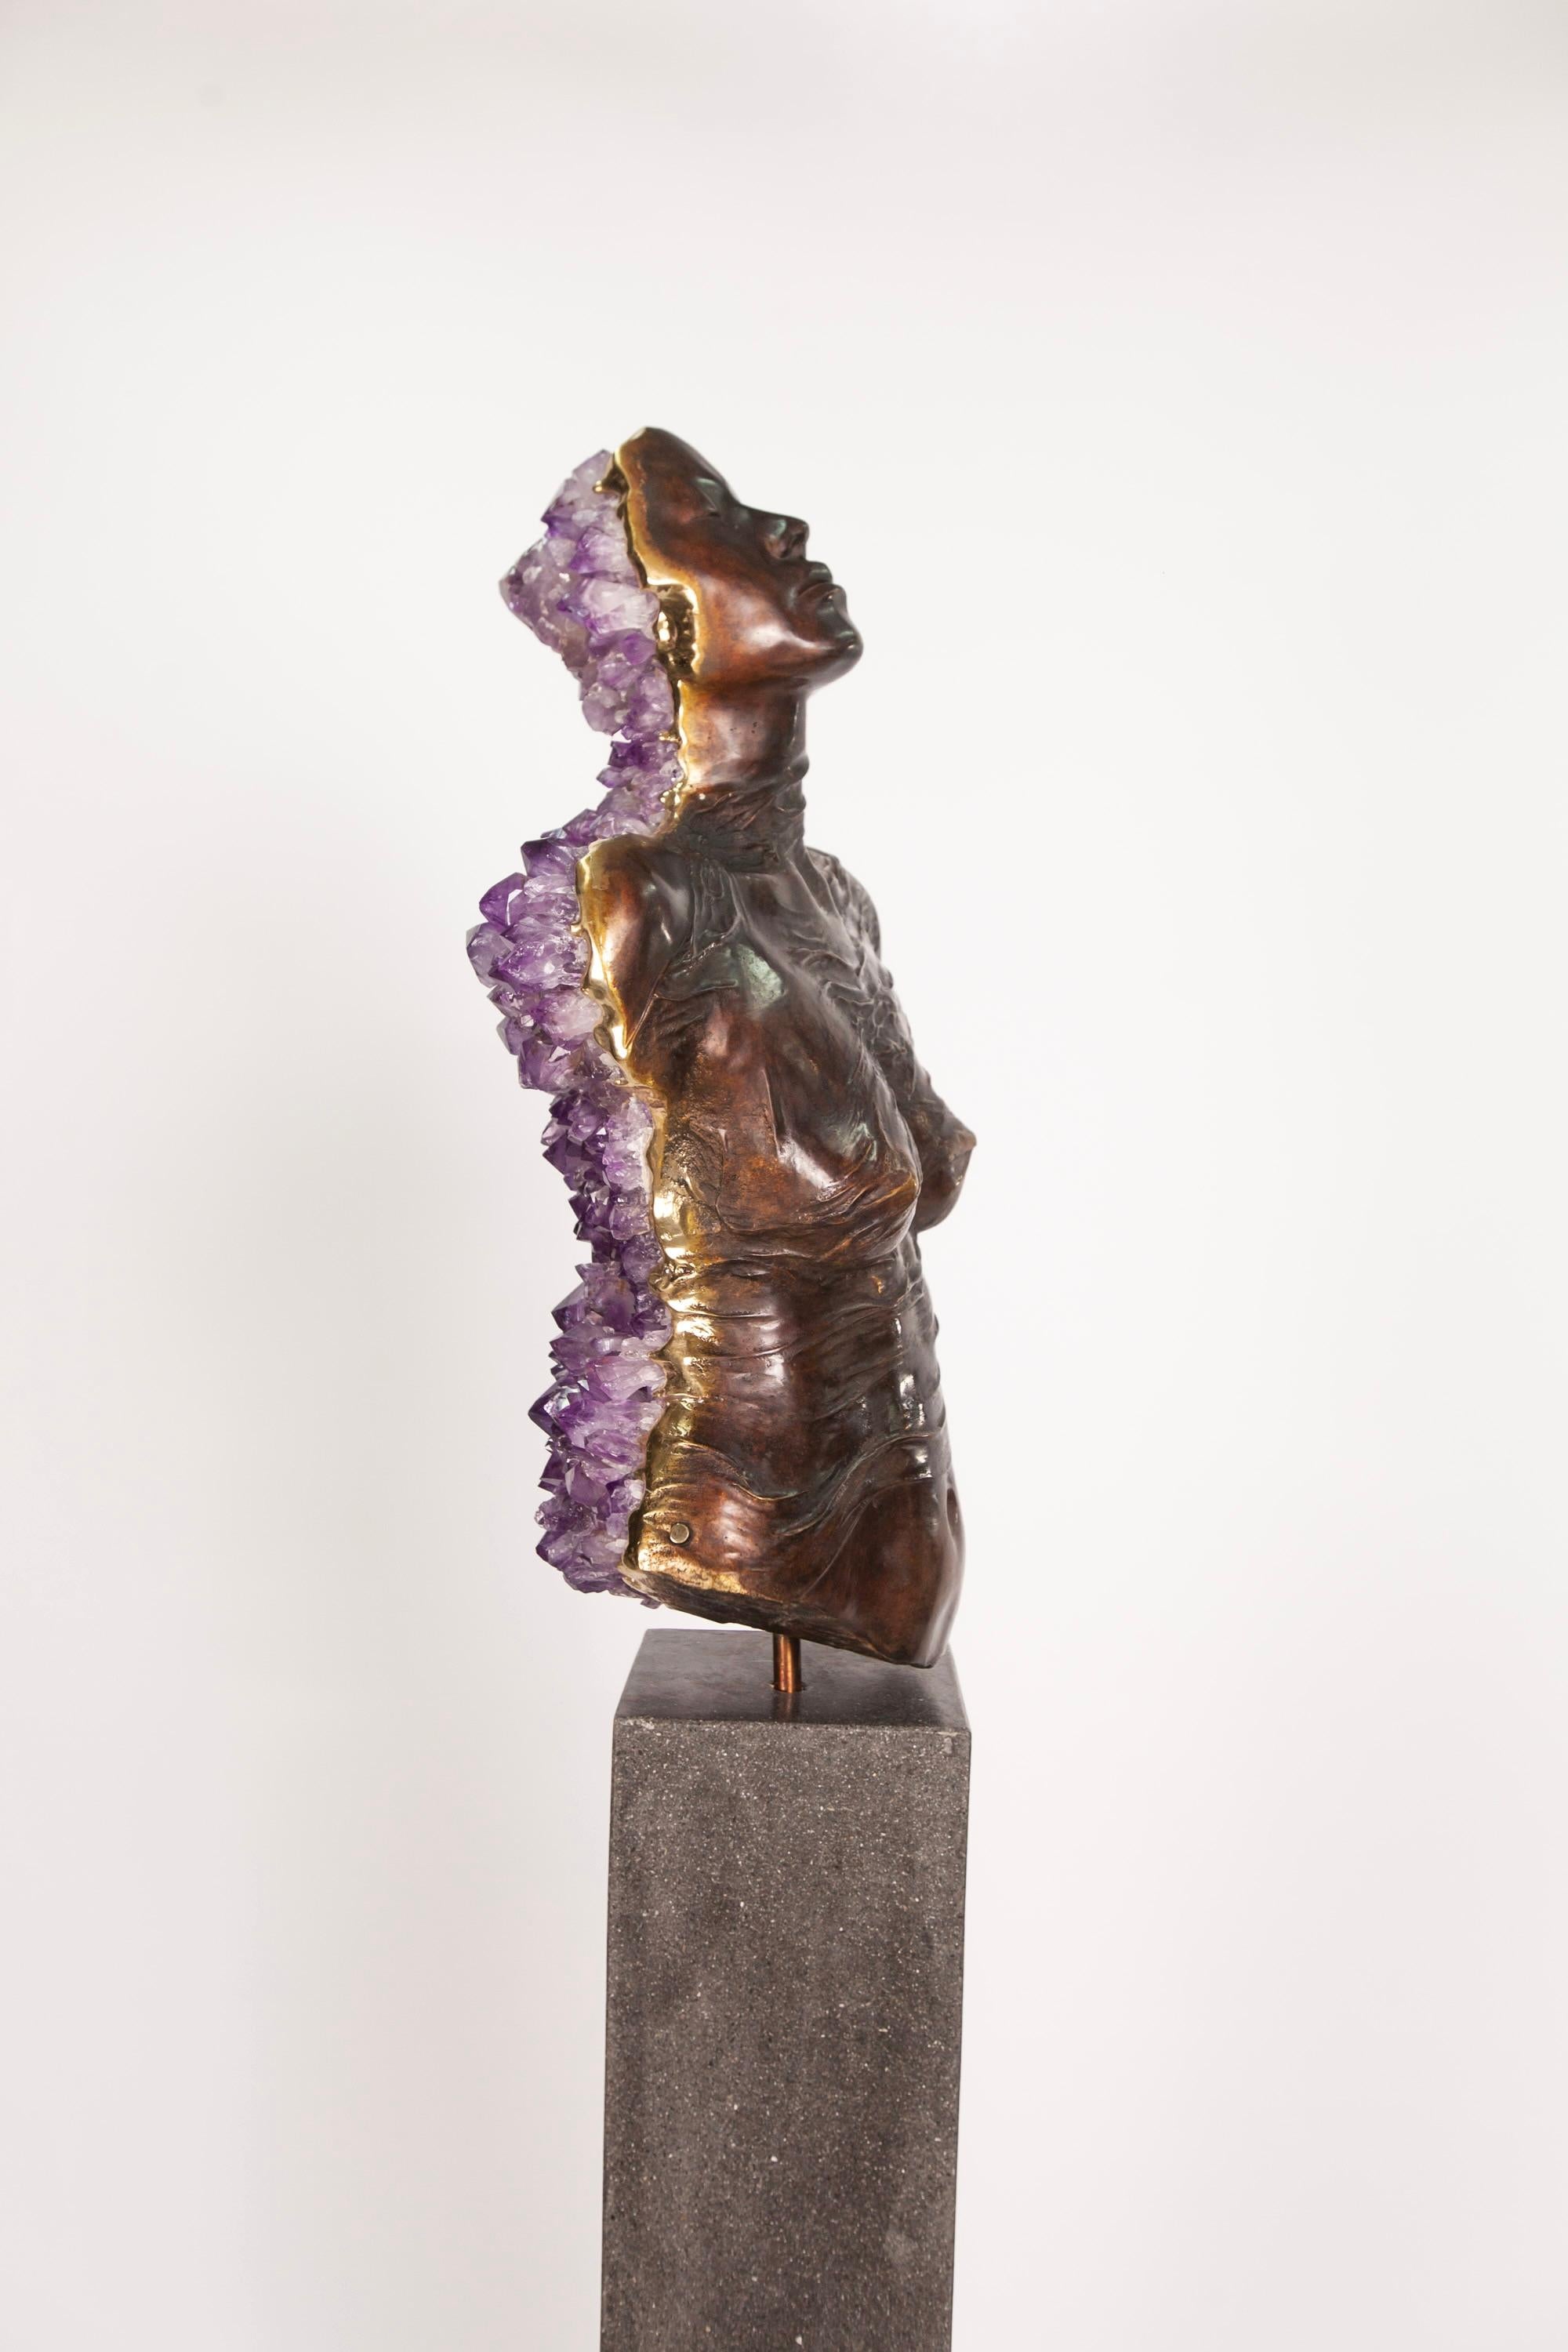 LIMINAL STATE  Amethyst crystals, bronze sculpture For Sale 4